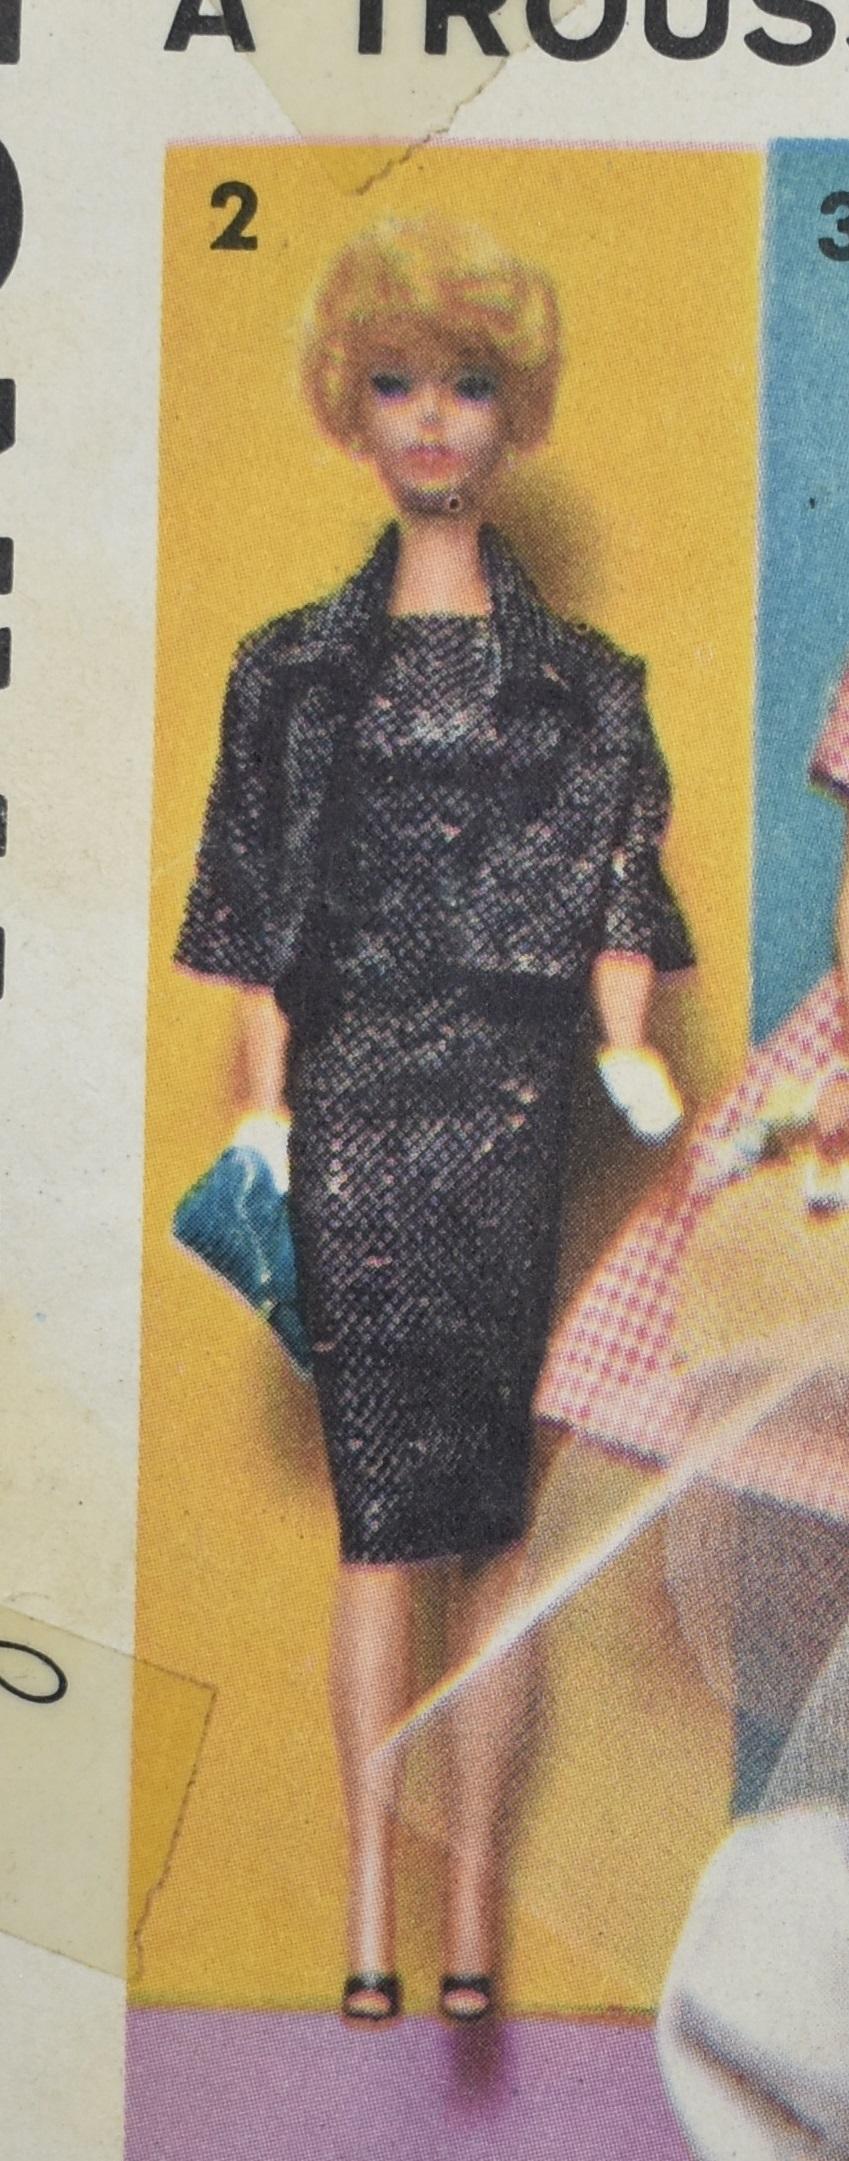 This image shows Sew-Easy Patterns by Advance vintage Mattel, Inc. Toymakers Barbie doll clothes sewing pattern #2895 with a zoom-in on View 2. This doll outfit appears to include a classy black dress with a matching black shrug that has 3/4 inch sleeves, accentuating the tiny white mittens that the vintage Barbie doll with blond bubble cut hair is wearing.